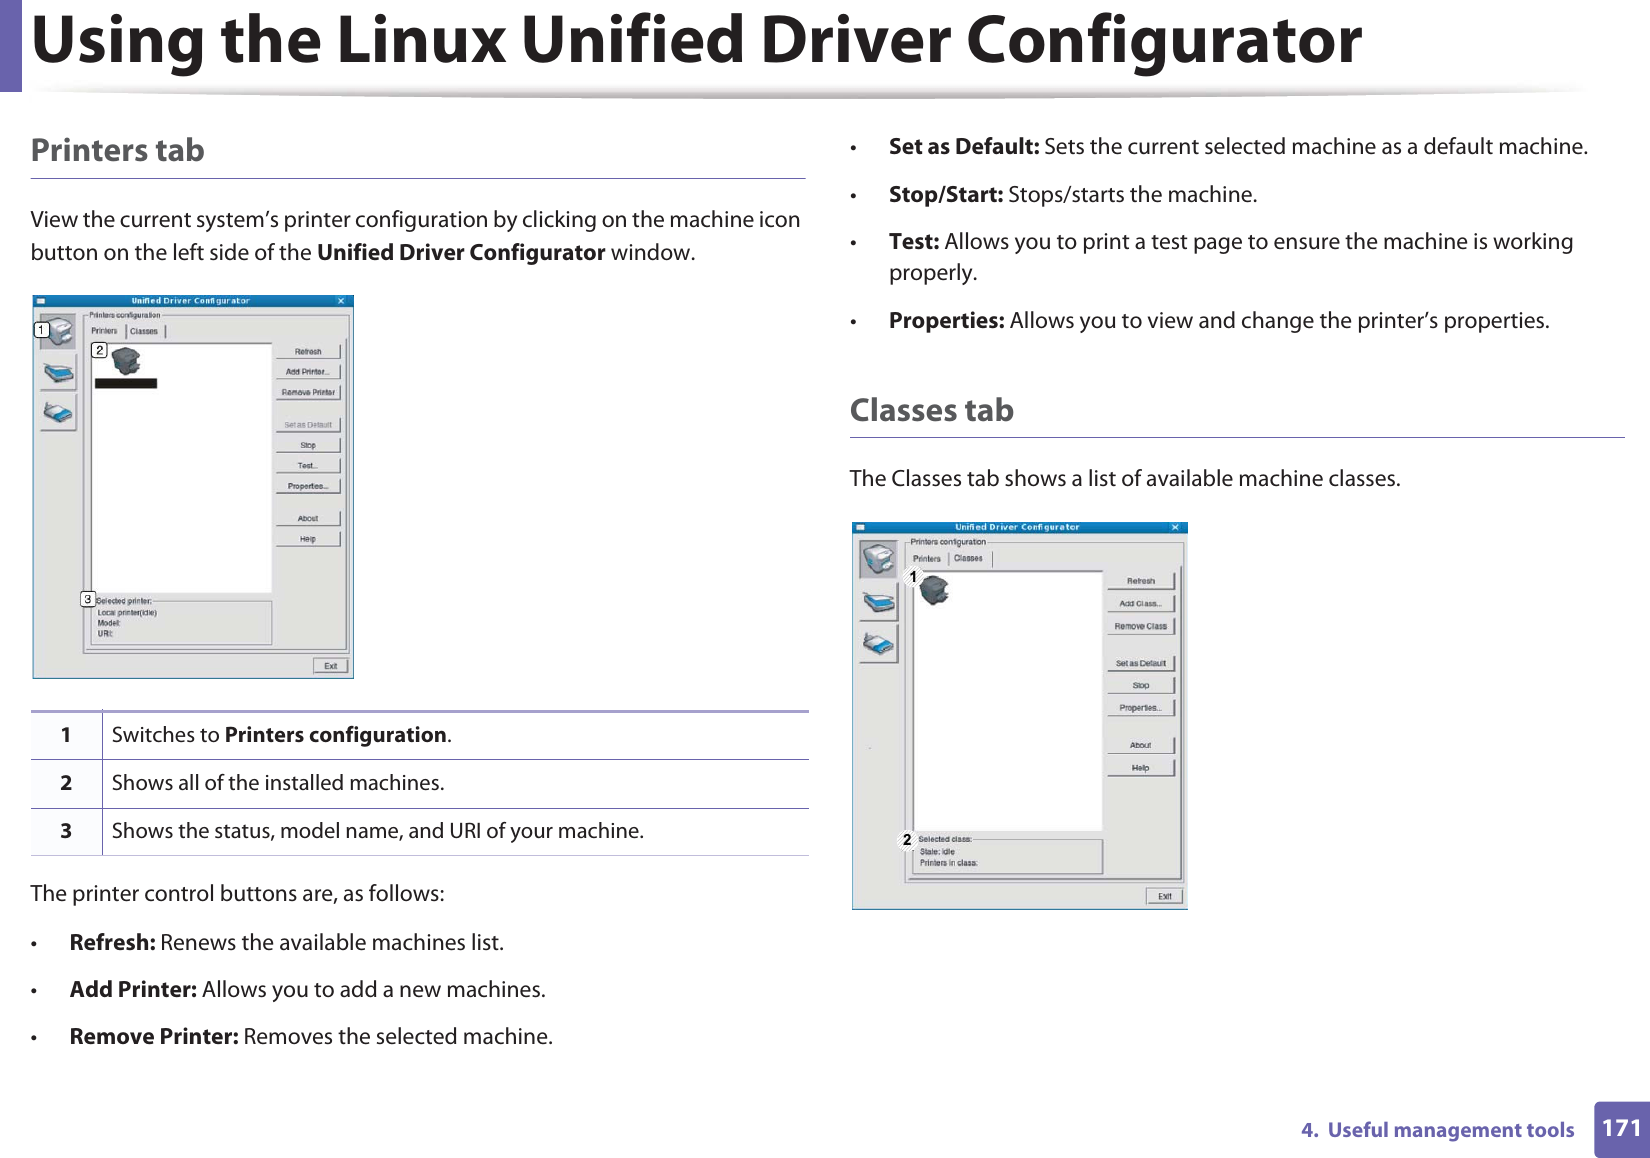 Using the Linux Unified Driver Configurator1714.  Useful management toolsPrinters tabView the current system’s printer configuration by clicking on the machine icon button on the left side of the Unified Driver Configurator window.The printer control buttons are, as follows:•Refresh: Renews the available machines list.•Add Printer: Allows you to add a new machines.•Remove Printer: Removes the selected machine.•Set as Default: Sets the current selected machine as a default machine.•Stop/Start: Stops/starts the machine.•Test: Allows you to print a test page to ensure the machine is working properly.•Properties: Allows you to view and change the printer’s properties. Classes tabThe Classes tab shows a list of available machine classes.1Switches to Printers configuration.2Shows all of the installed machines.3Shows the status, model name, and URI of your machine.1 2